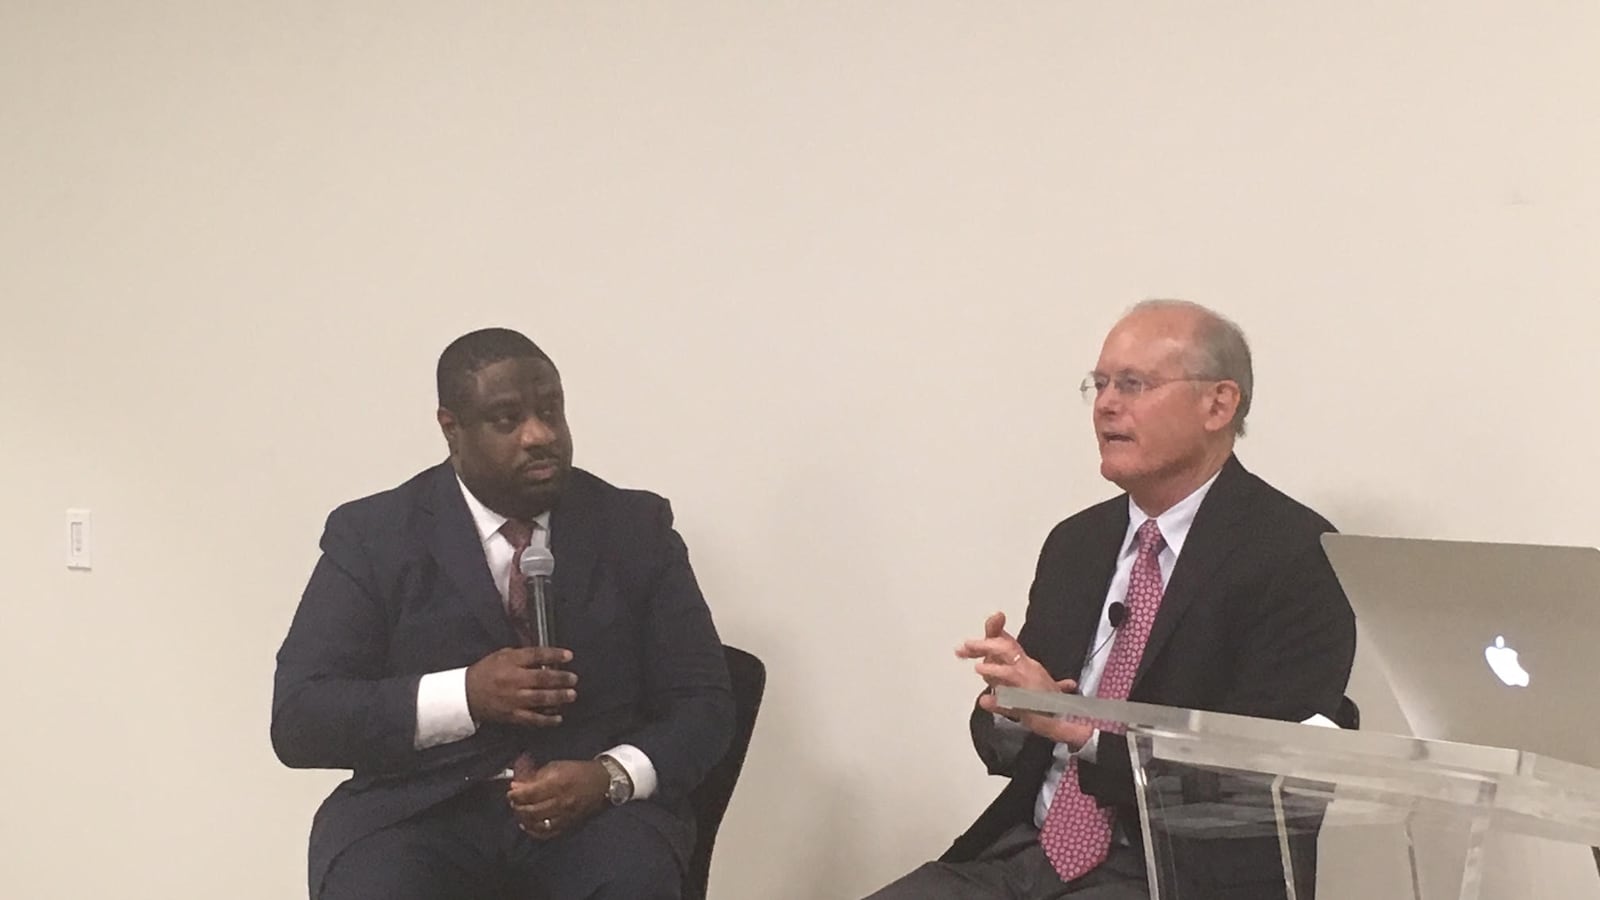 Marcus Robinson, left, CEO of Memphis Education Fund and author David Osborne at an event Tuesday in Crosstown Concourse.